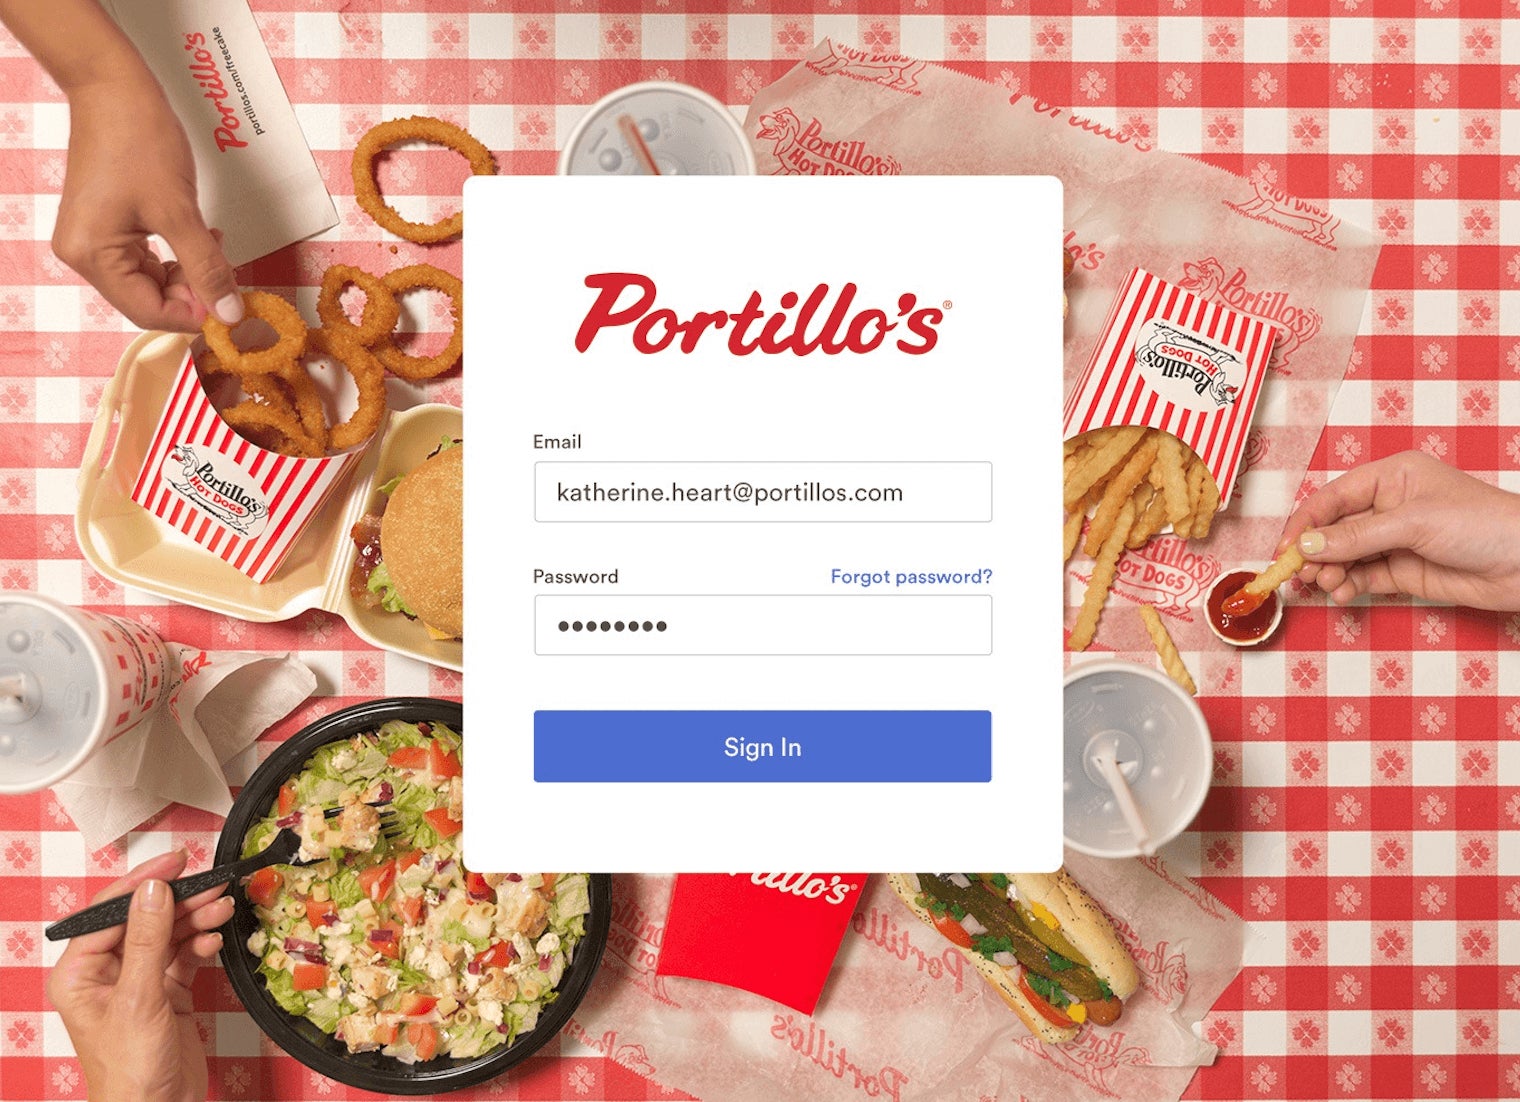 Portillo’s branded look and feel